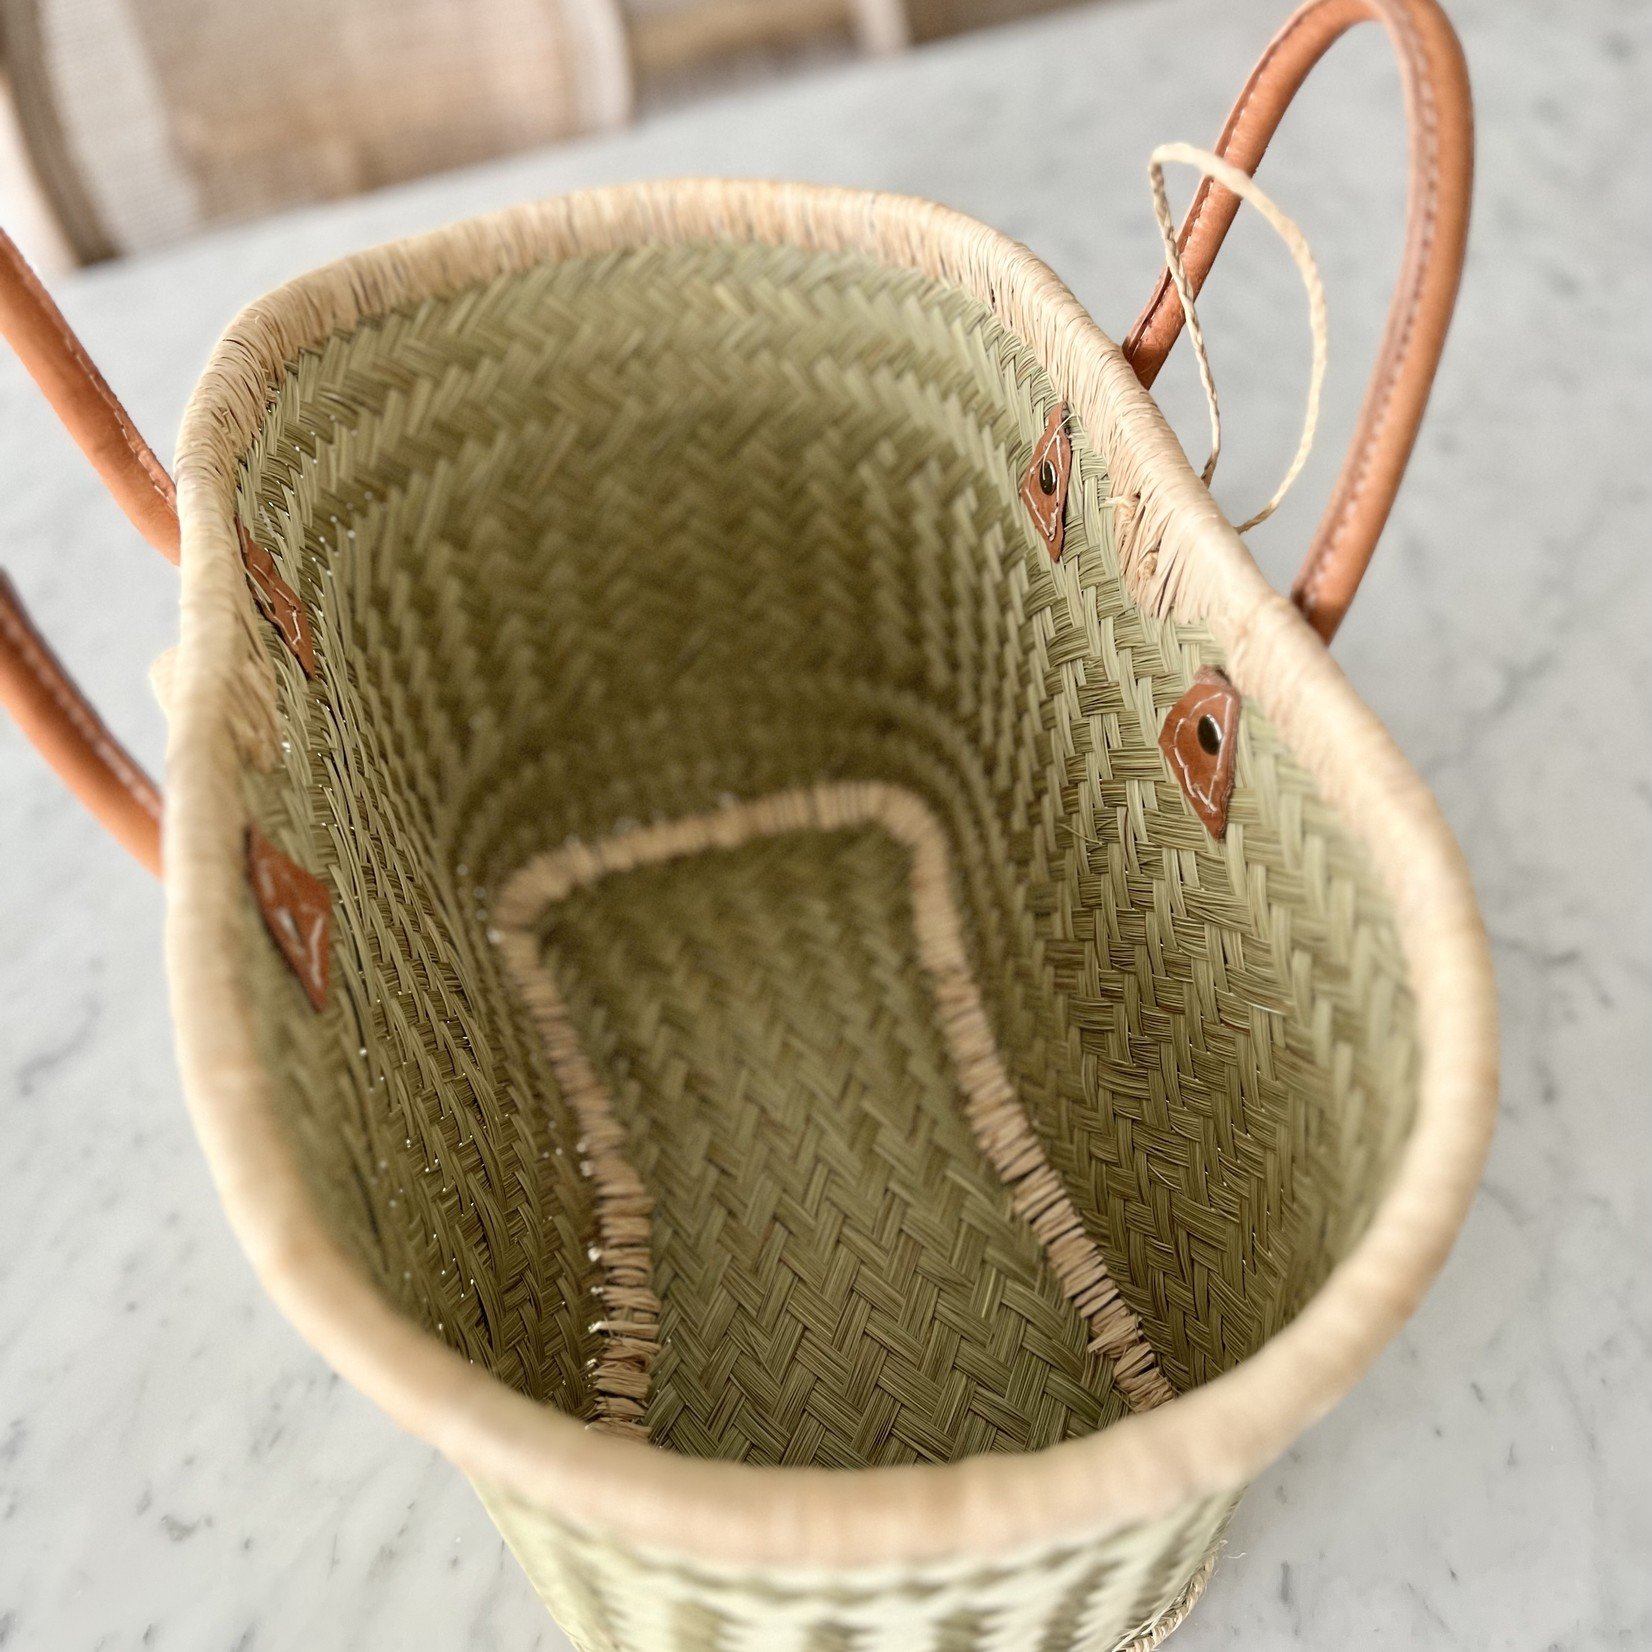 Tall wicker basket with handles - Large - French Mercantile